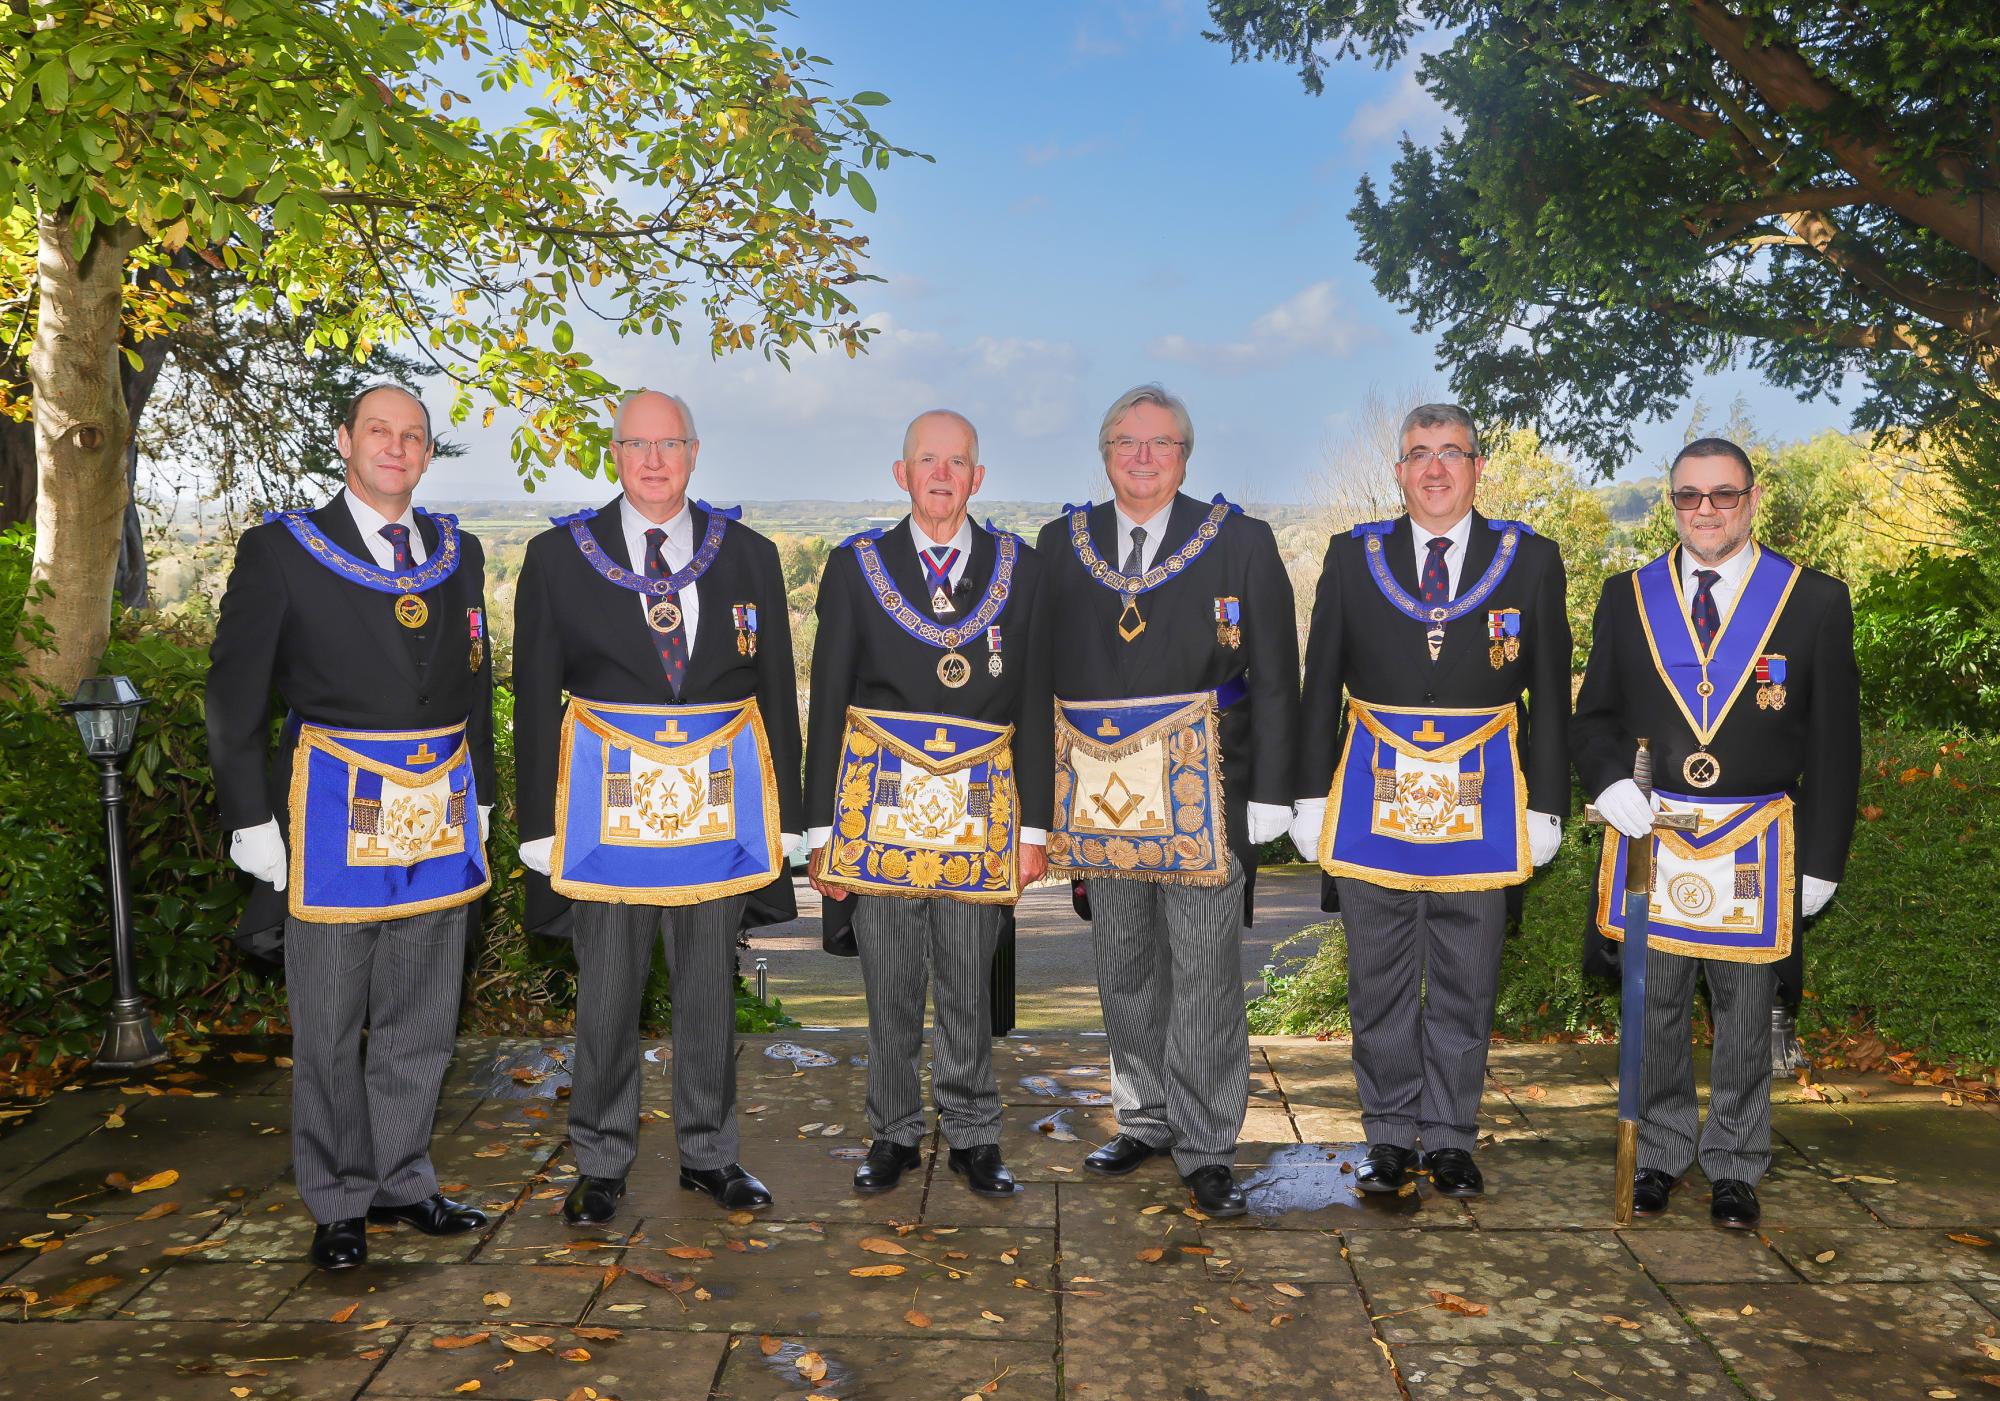 Freemasons group photo for installation of new Provincial Grand Master of Somerset